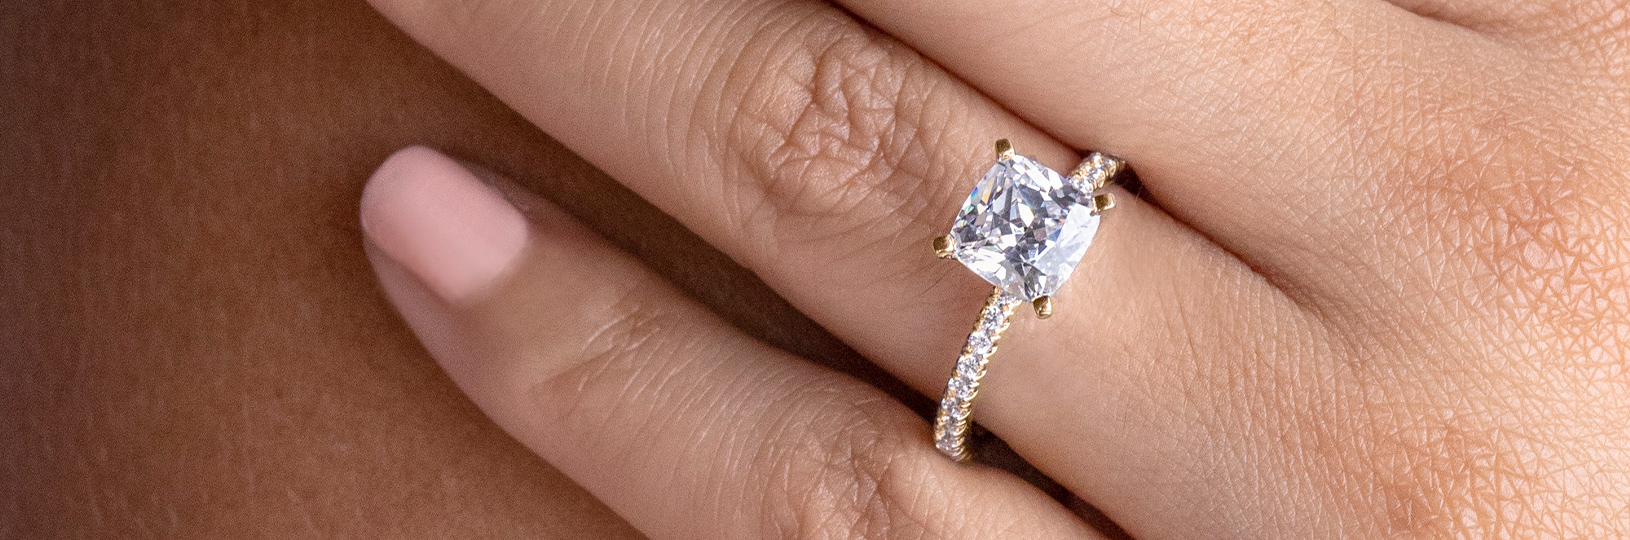 How Expensive Are Tiffany Engagement Rings? | myGemma